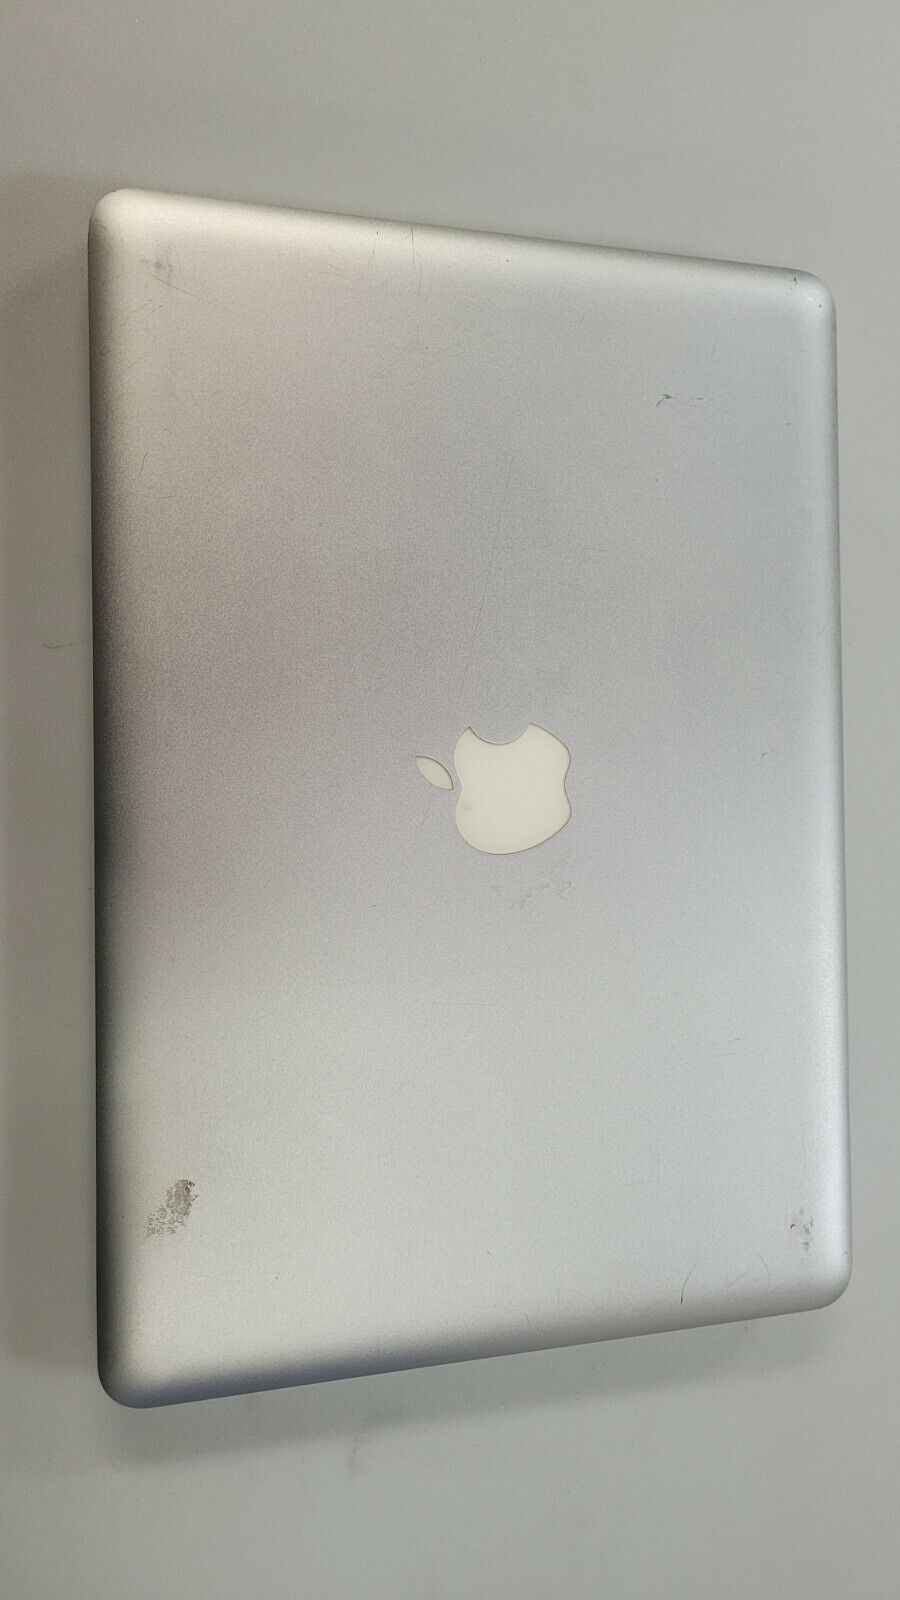 MacBook Pro A1278 13-inch Core 2 Duo For Parts